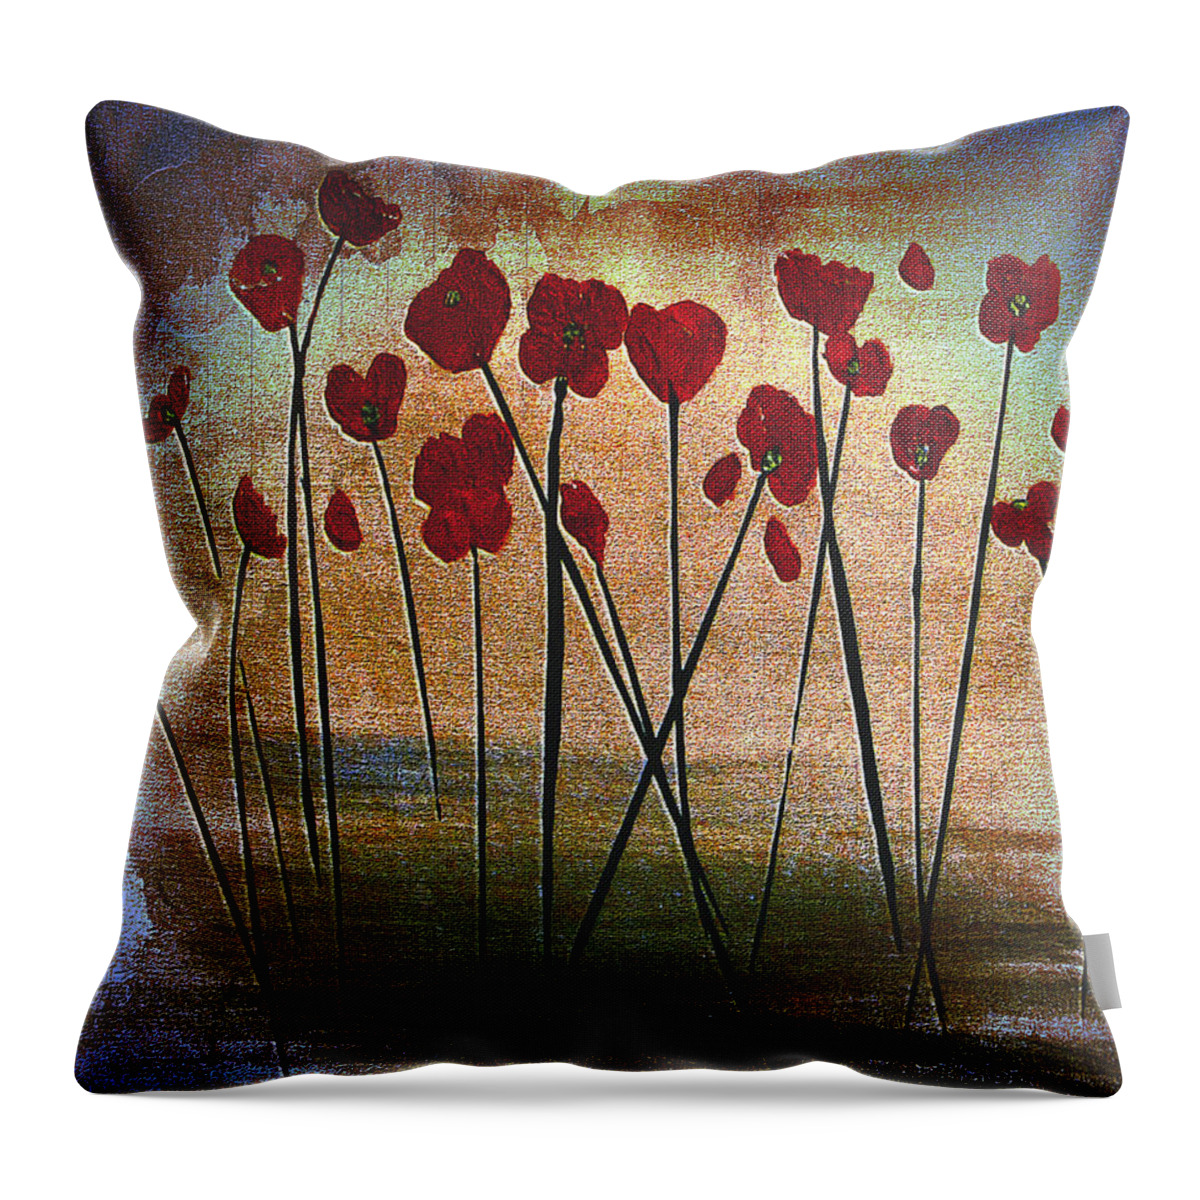 Martha Ann Throw Pillow featuring the painting Expressive Floral Red Poppy Field 725 by Mas Art Studio